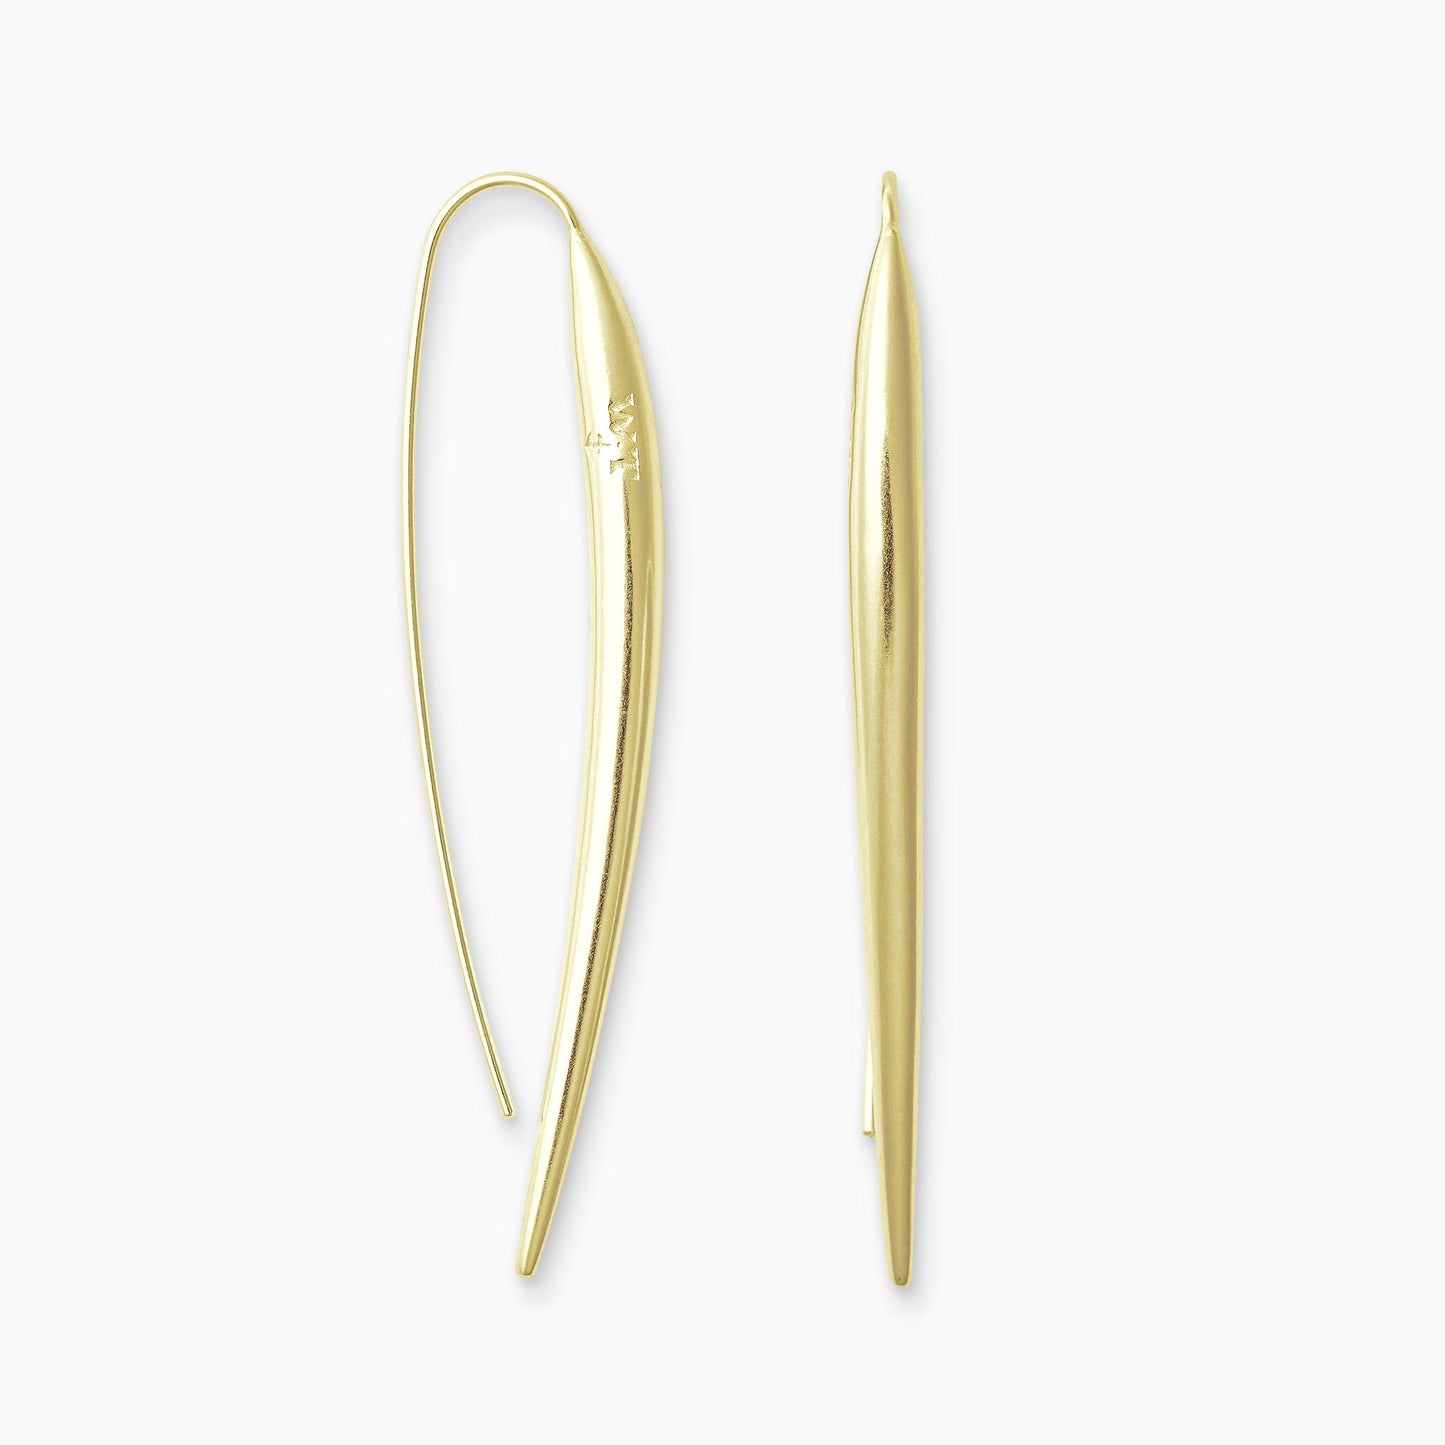 A pair of 18ct Fairtrade yellow gold  long slender shiny earrings with a hook fastening. 65mm length, 4mm diameter